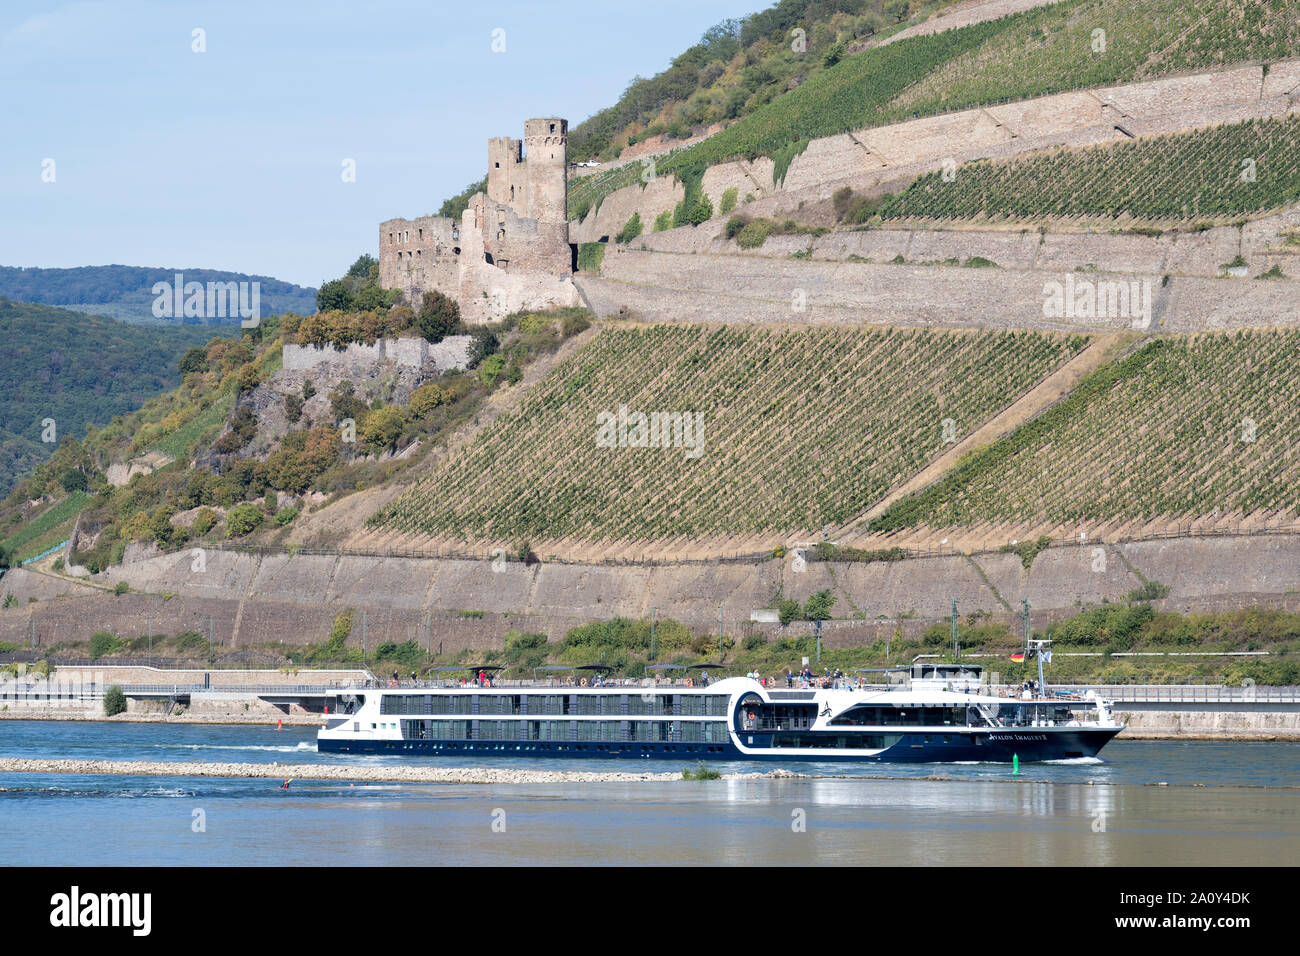 River cruise ship AVALON IMAGERY II passing Ehrenfels Castle. Avalon Waterways is a river cruise company owned by the Globus family of brands. Stock Photo